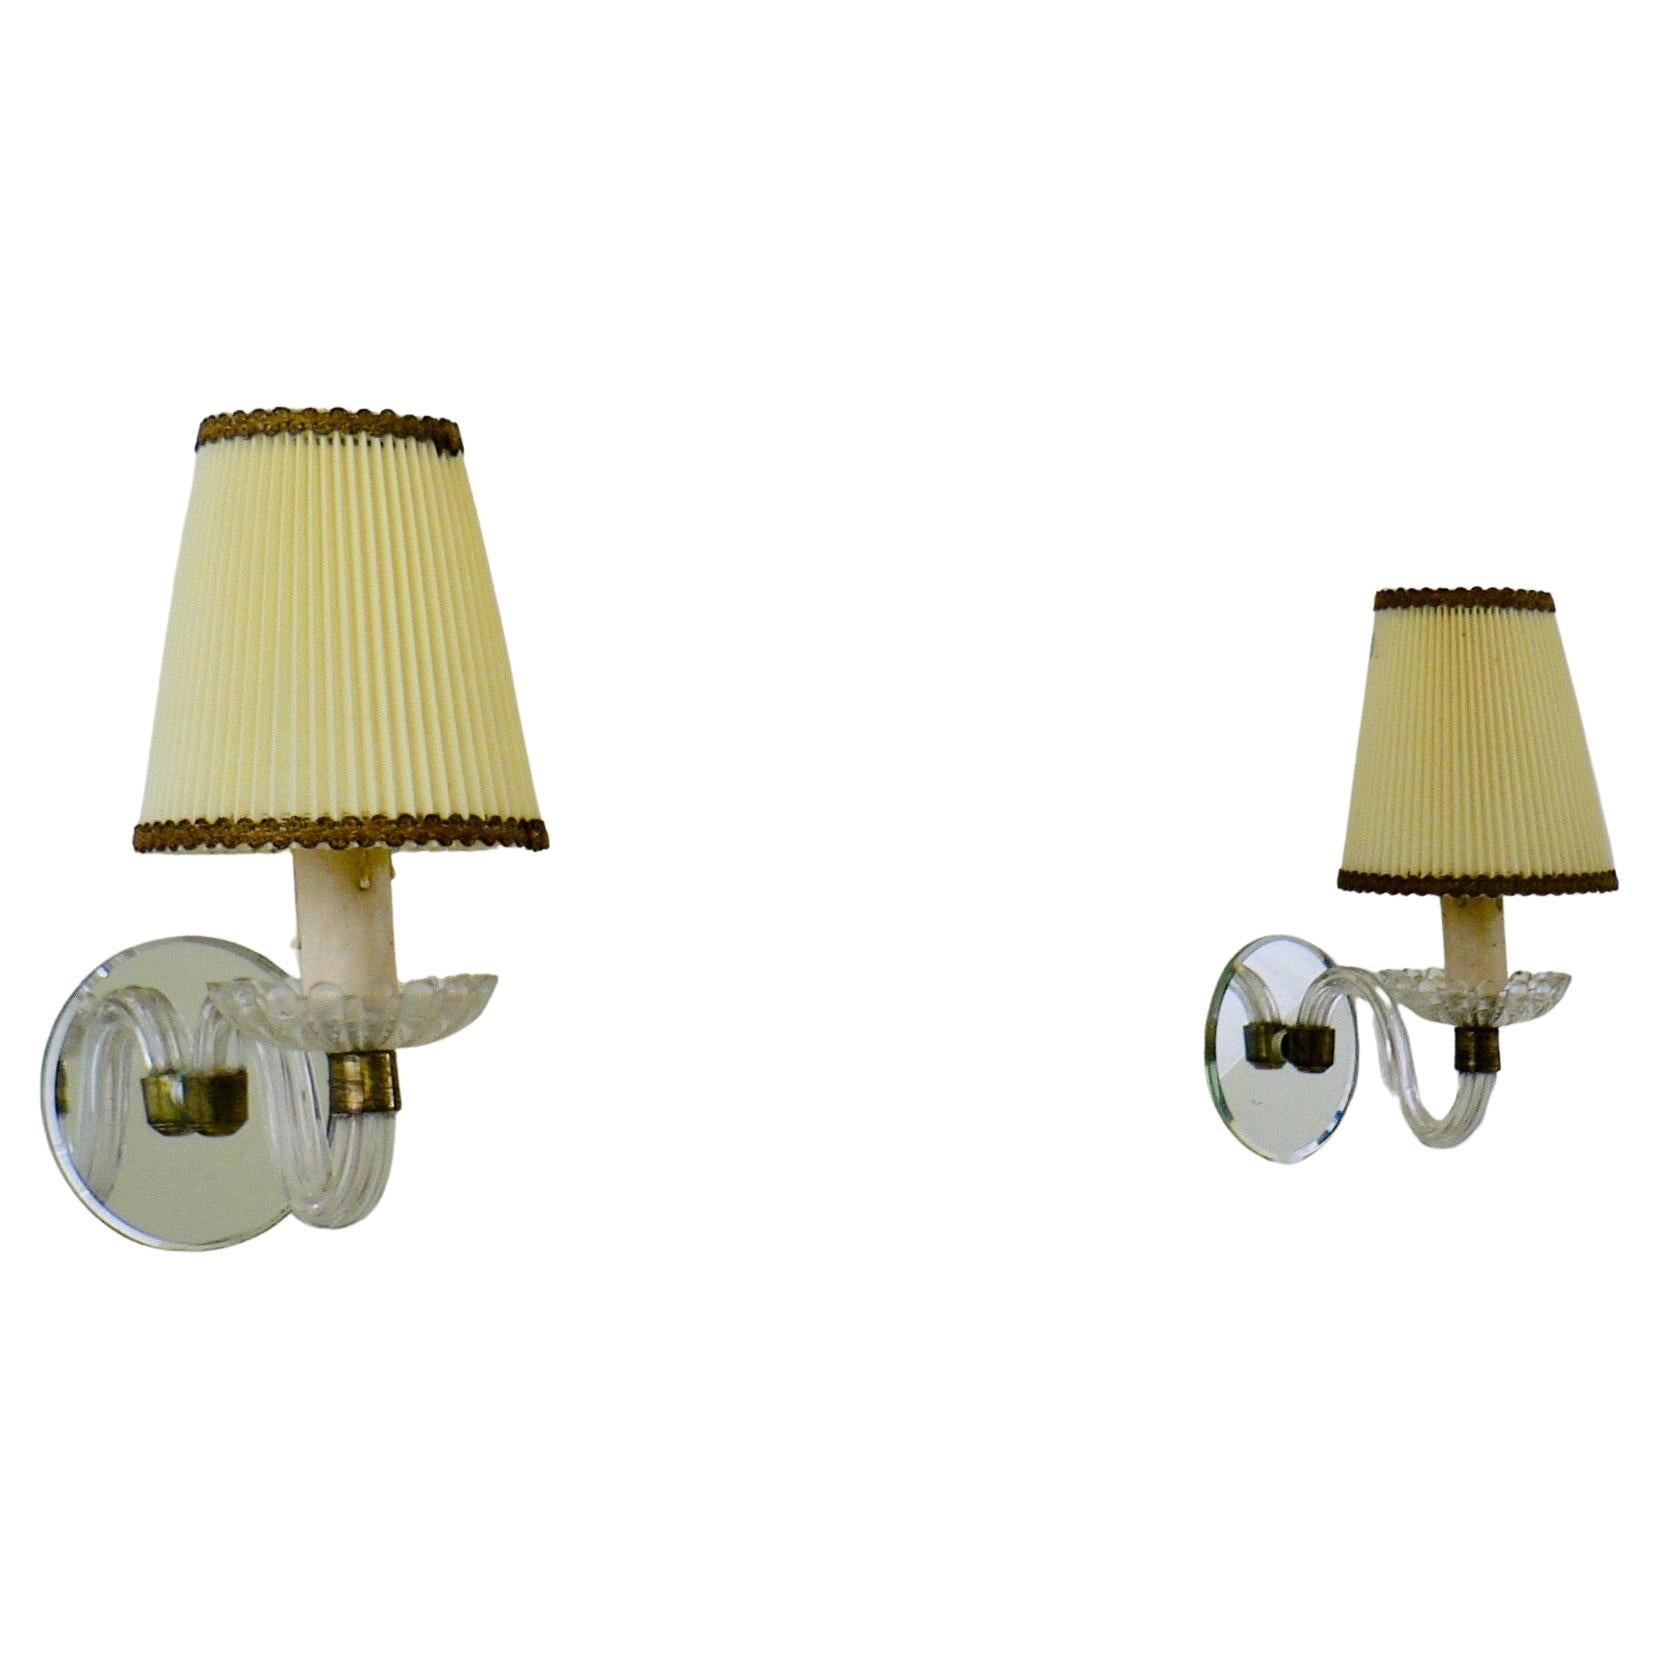 A pair of 1930 glass et mirror wall sconce lamps from France.